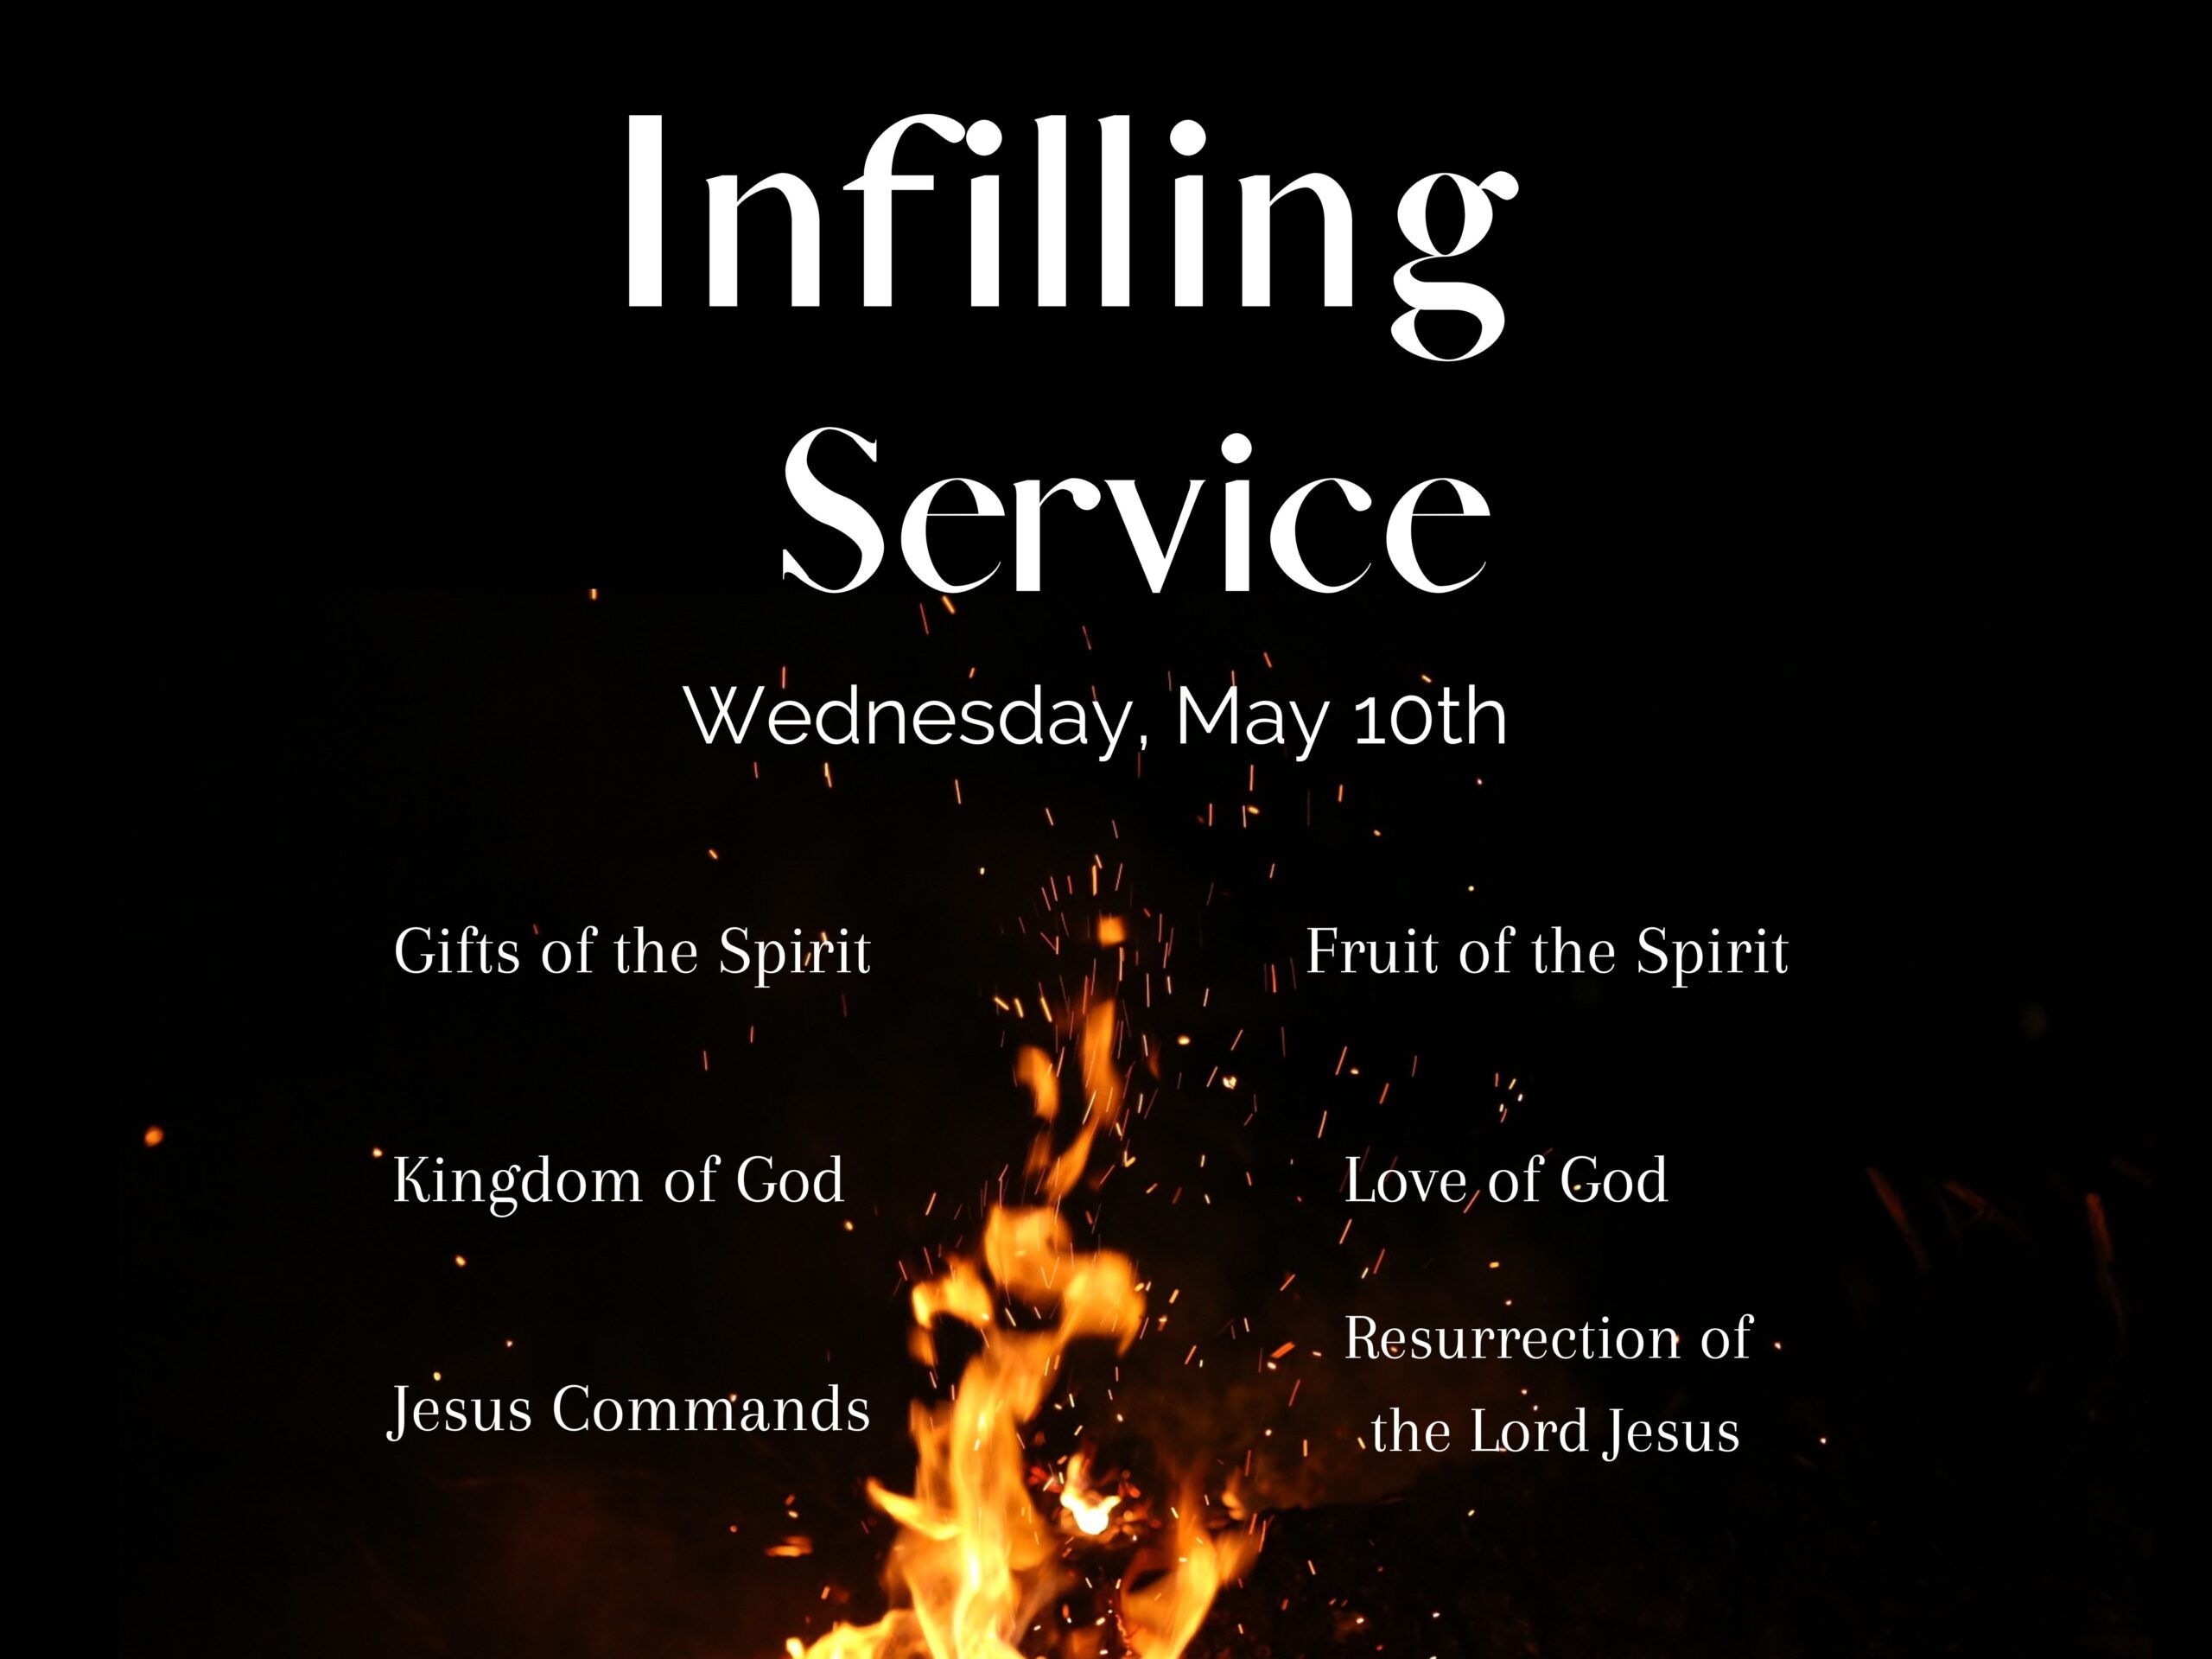 Infilling Service